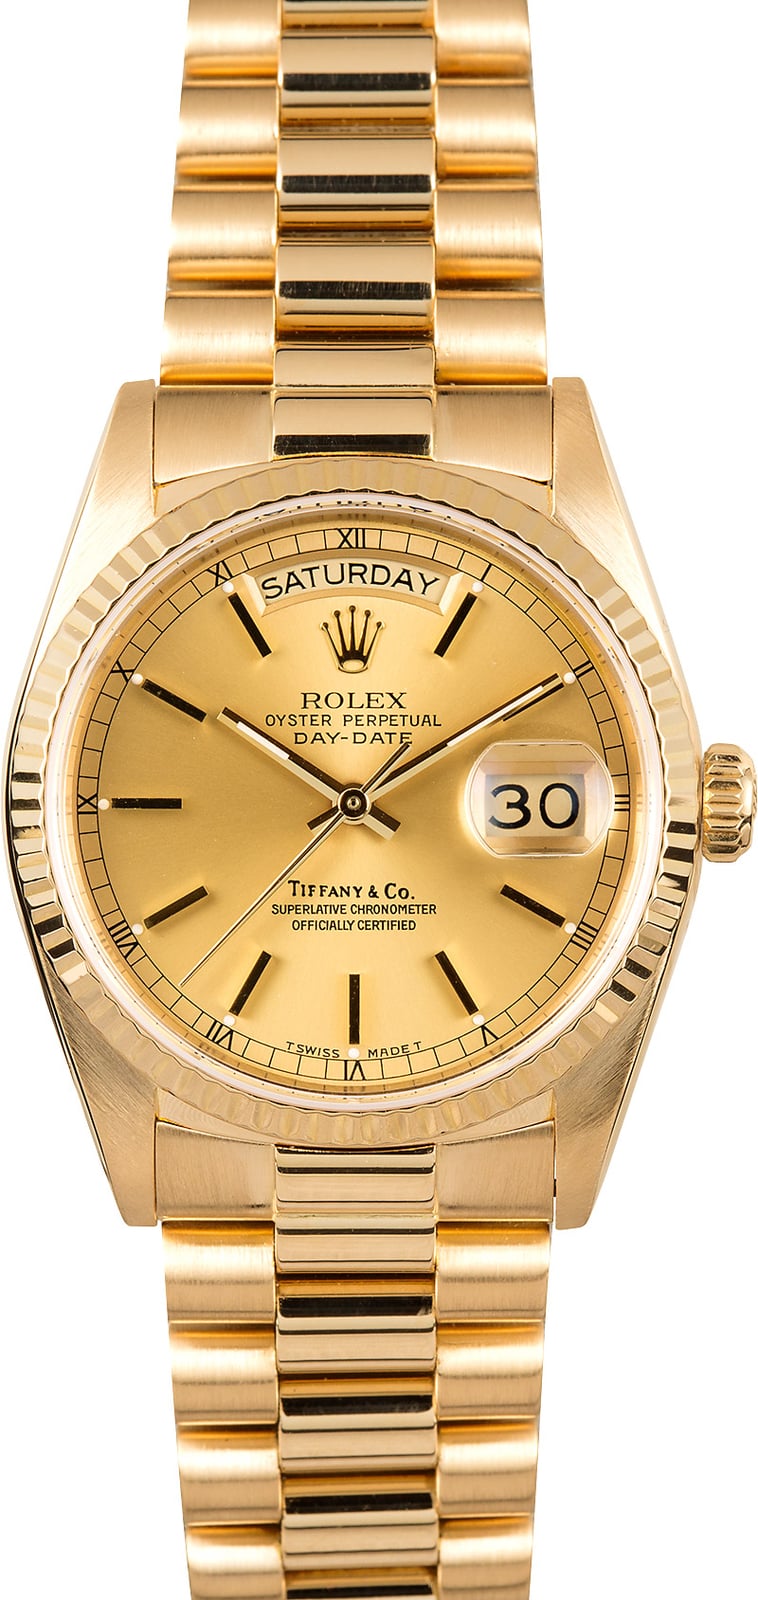 Rolex President Yellow Gold Day-Date 18038